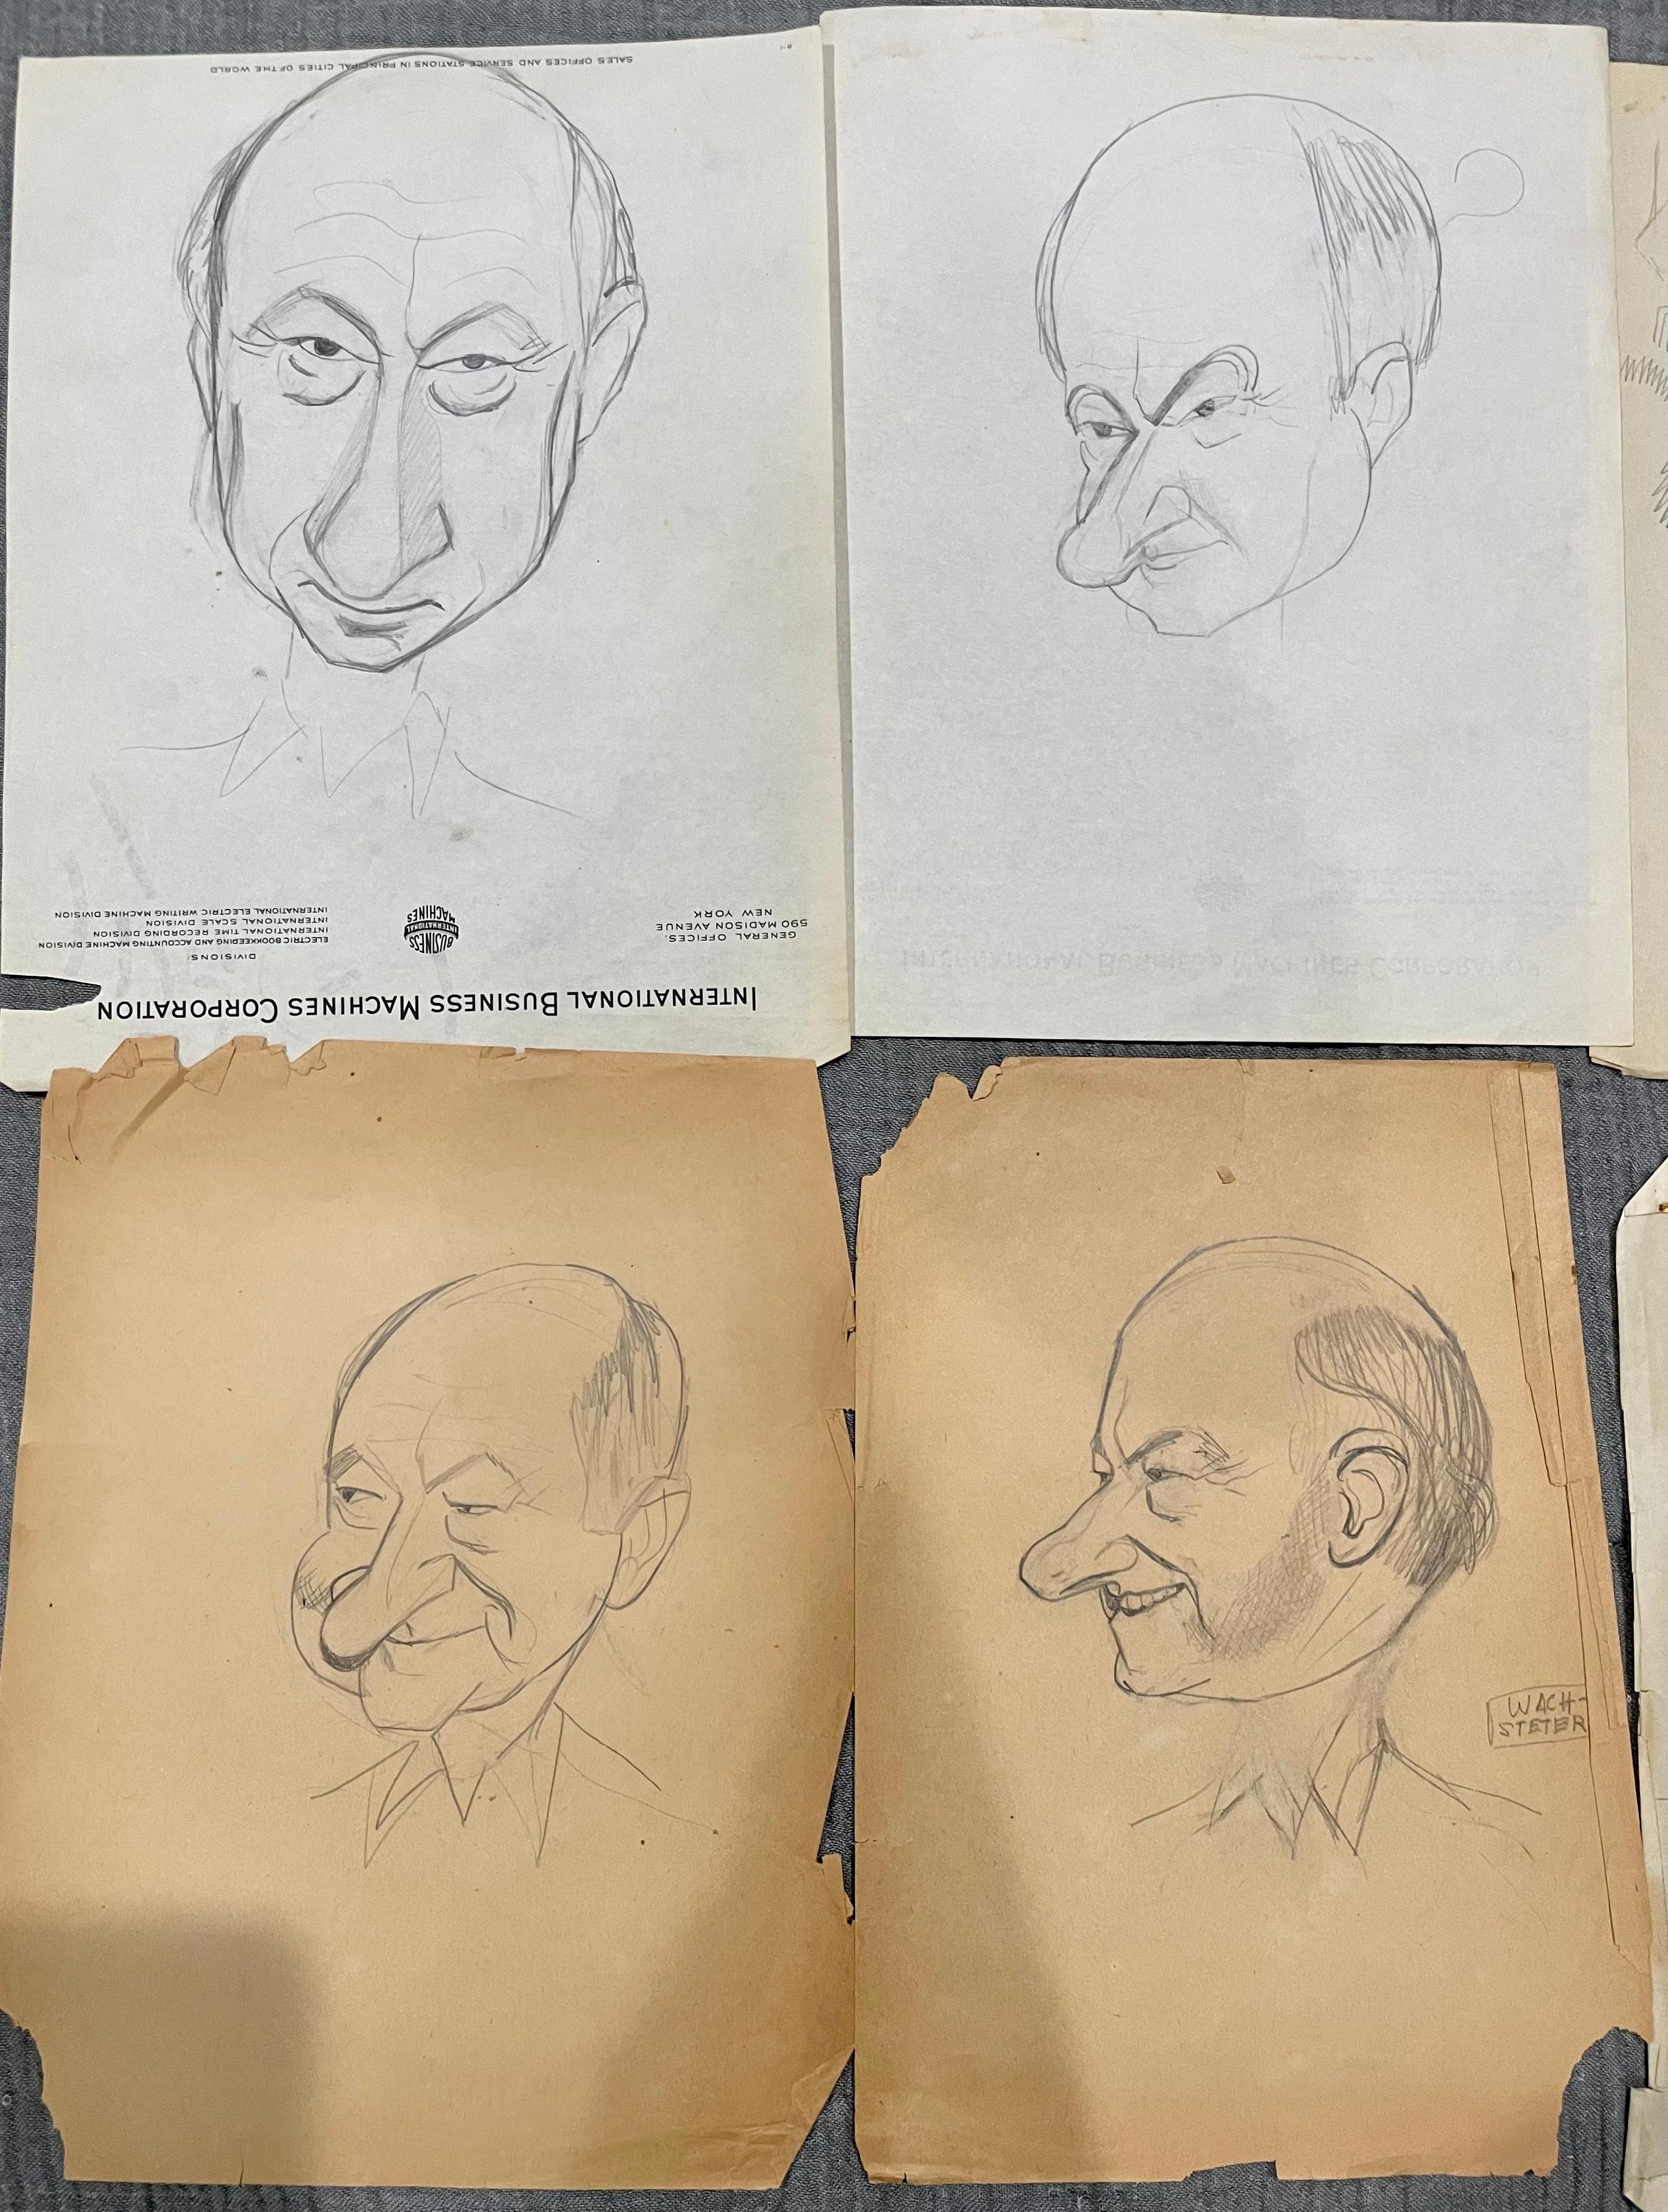 Signed Lower Right by Artist

GRAPHITE SKETCHES - Caricature by George Wachsteter (1911-2004) of legendary autocratic motion picture director, Cecil B. DeMille, 8